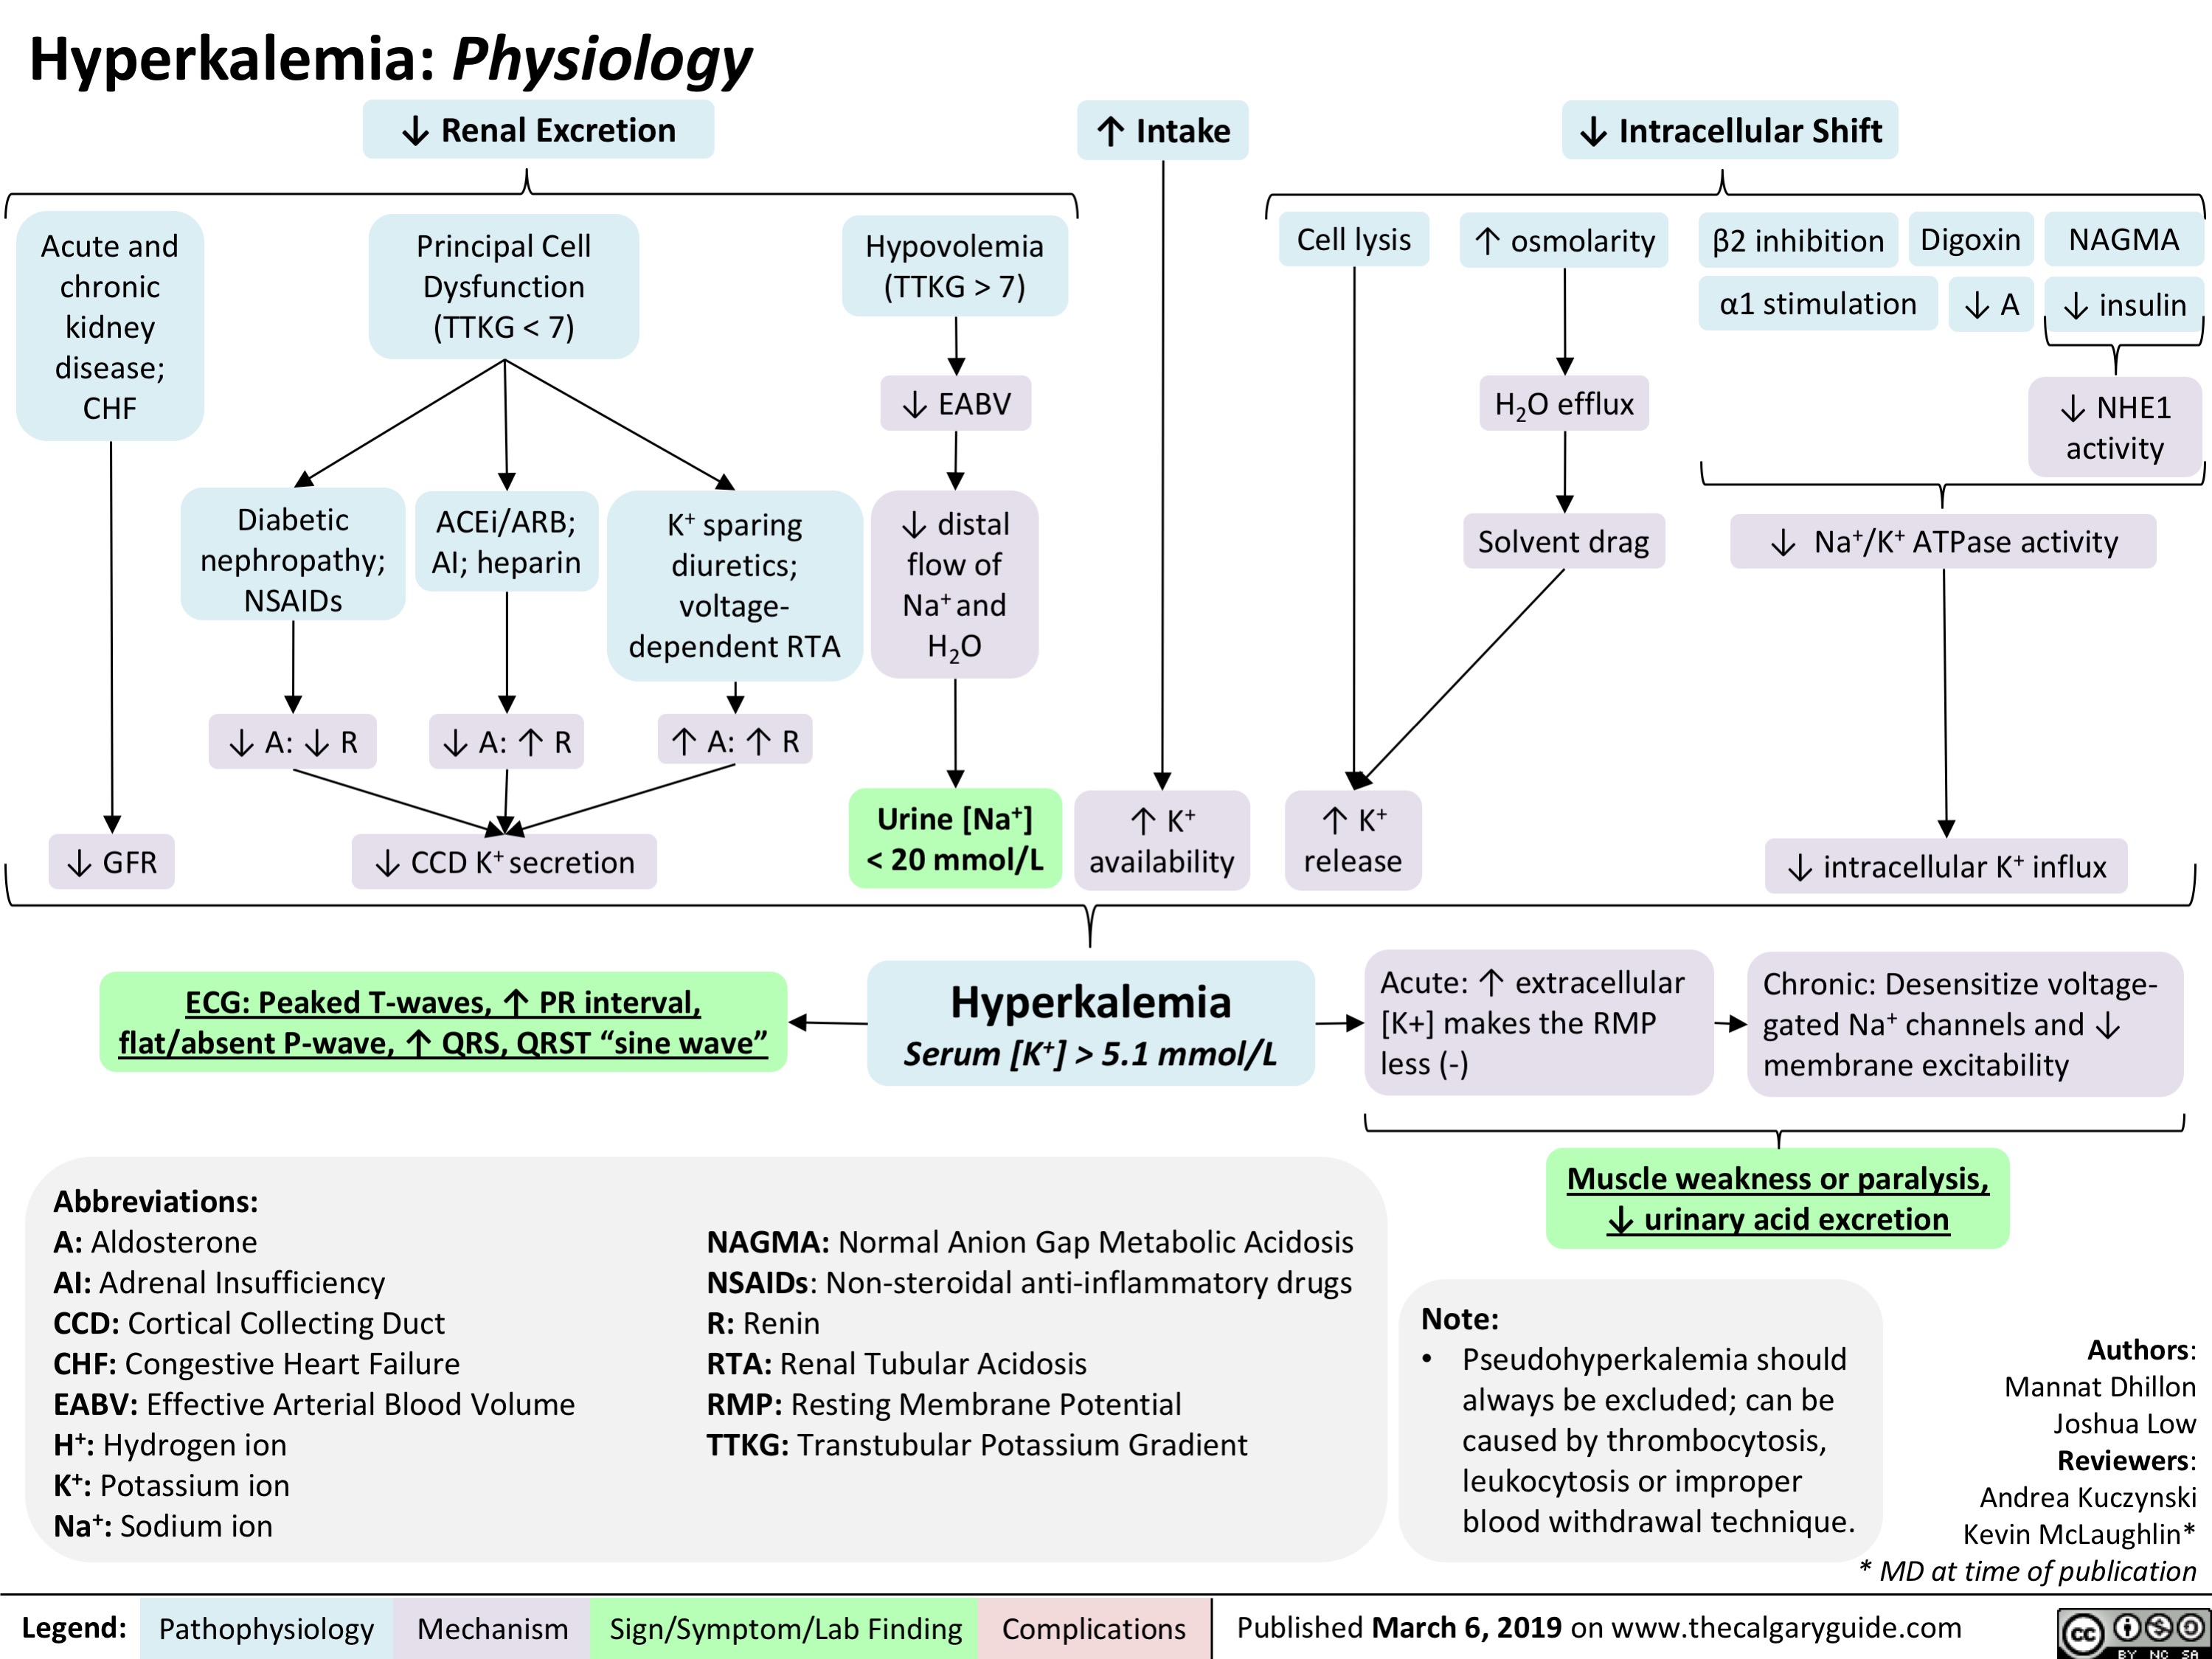 Hyperkalemia: Physiology ↓ Renal Excretion
↑ Intake
↓ Intracellular Shift
              Acute and chronic kidney disease; CHF
Principal Cell Dysfunction (TTKG < 7)
ACEi/ARB; AI; heparin
Hypovolemia (TTKG > 7)
↓ EABV
↓ distal flow of Na+ and H2O
Urine [Na+] < 20 mmol/L
Cell lysis
↑ osmolarity H2O efflux
Solvent drag
β2 inhibition α1 stimulation
Digoxin ↓ A
NAGMA ↓ insulin
↓ NHE1 activity
                   Diabetic nephropathy; NSAIDs
↓ A: ↓ R
K+ sparing diuretics; voltage- dependent RTA
↓ Na+/K+ ATPase activity
                ↓ GFR
↓ A: ↑ R ↑ A: ↑ R
↓ CCD K+ secretion
↑ K+ availability
↑ K+ release
↓ intracellular K+ influx
Chronic: Desensitize voltage- gated Na+ channels and ↓ membrane excitability
     ECG: Peaked T-waves, ↑ PR interval, flat/absent P-wave, ↑ QRS, QRST “sine wave”
Hyperkalemia
Serum [K+] > 5.1 mmol/L
Acute: ↑ extracellular [K+] makes the RMP less (-)
      Abbreviations:
A: Aldosterone
AI: Adrenal Insufficiency
CCD: Cortical Collecting Duct
CHF: Congestive Heart Failure
EABV: Effective Arterial Blood Volume H+: Hydrogen ion
K+: Potassium ion
Na+: Sodium ion
NAGMA: Normal Anion Gap Metabolic Acidosis
NSAIDs: Non-steroidal anti-inflammatory drugs Note:
Muscle weakness or paralysis, ↓ urinary acid excretion
 R: Renin
RTA: Renal Tubular Acidosis
RMP: Resting Membrane Potential TTKG: Transtubular Potassium Gradient
• Pseudohyperkalemia should always be excluded; can be caused by thrombocytosis, leukocytosis or improper blood withdrawal technique.
Authors: Mannat Dhillon Joshua Low Reviewers: Andrea Kuczynski Kevin McLaughlin* * MD at time of publication
 Legend:
 Pathophysiology
 Mechanism
Sign/Symptom/Lab Finding
  Complications
Published March 6, 2019 on www.thecalgaryguide.com
   